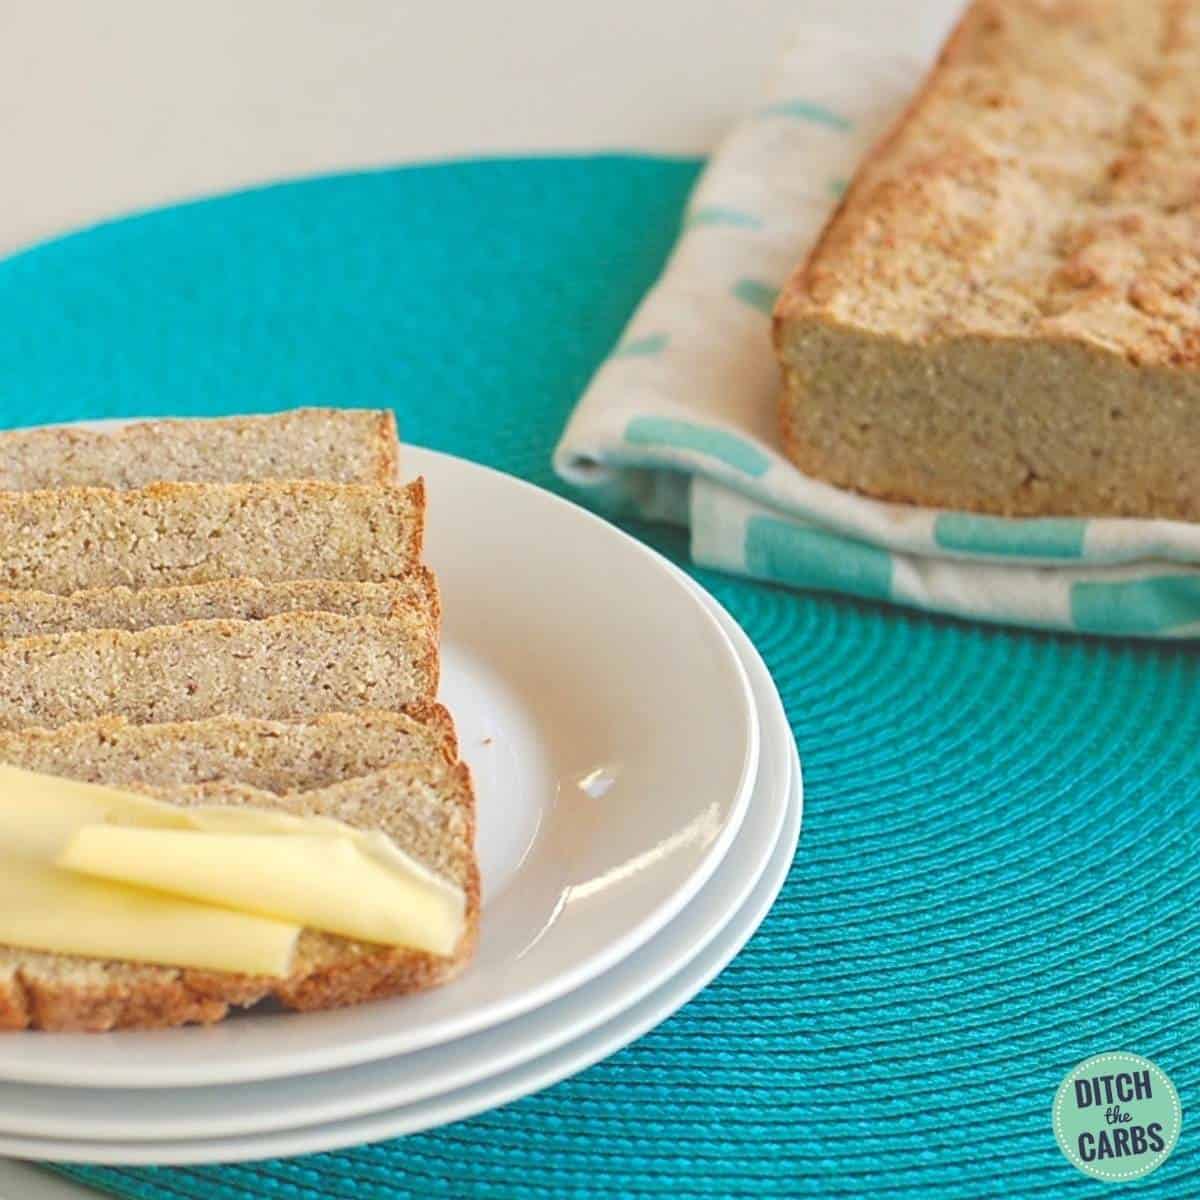 https://thinlicious.com/wp-content/uploads/2020/05/Low-carb-Lockdown-loaf-1200x1200-1.jpg